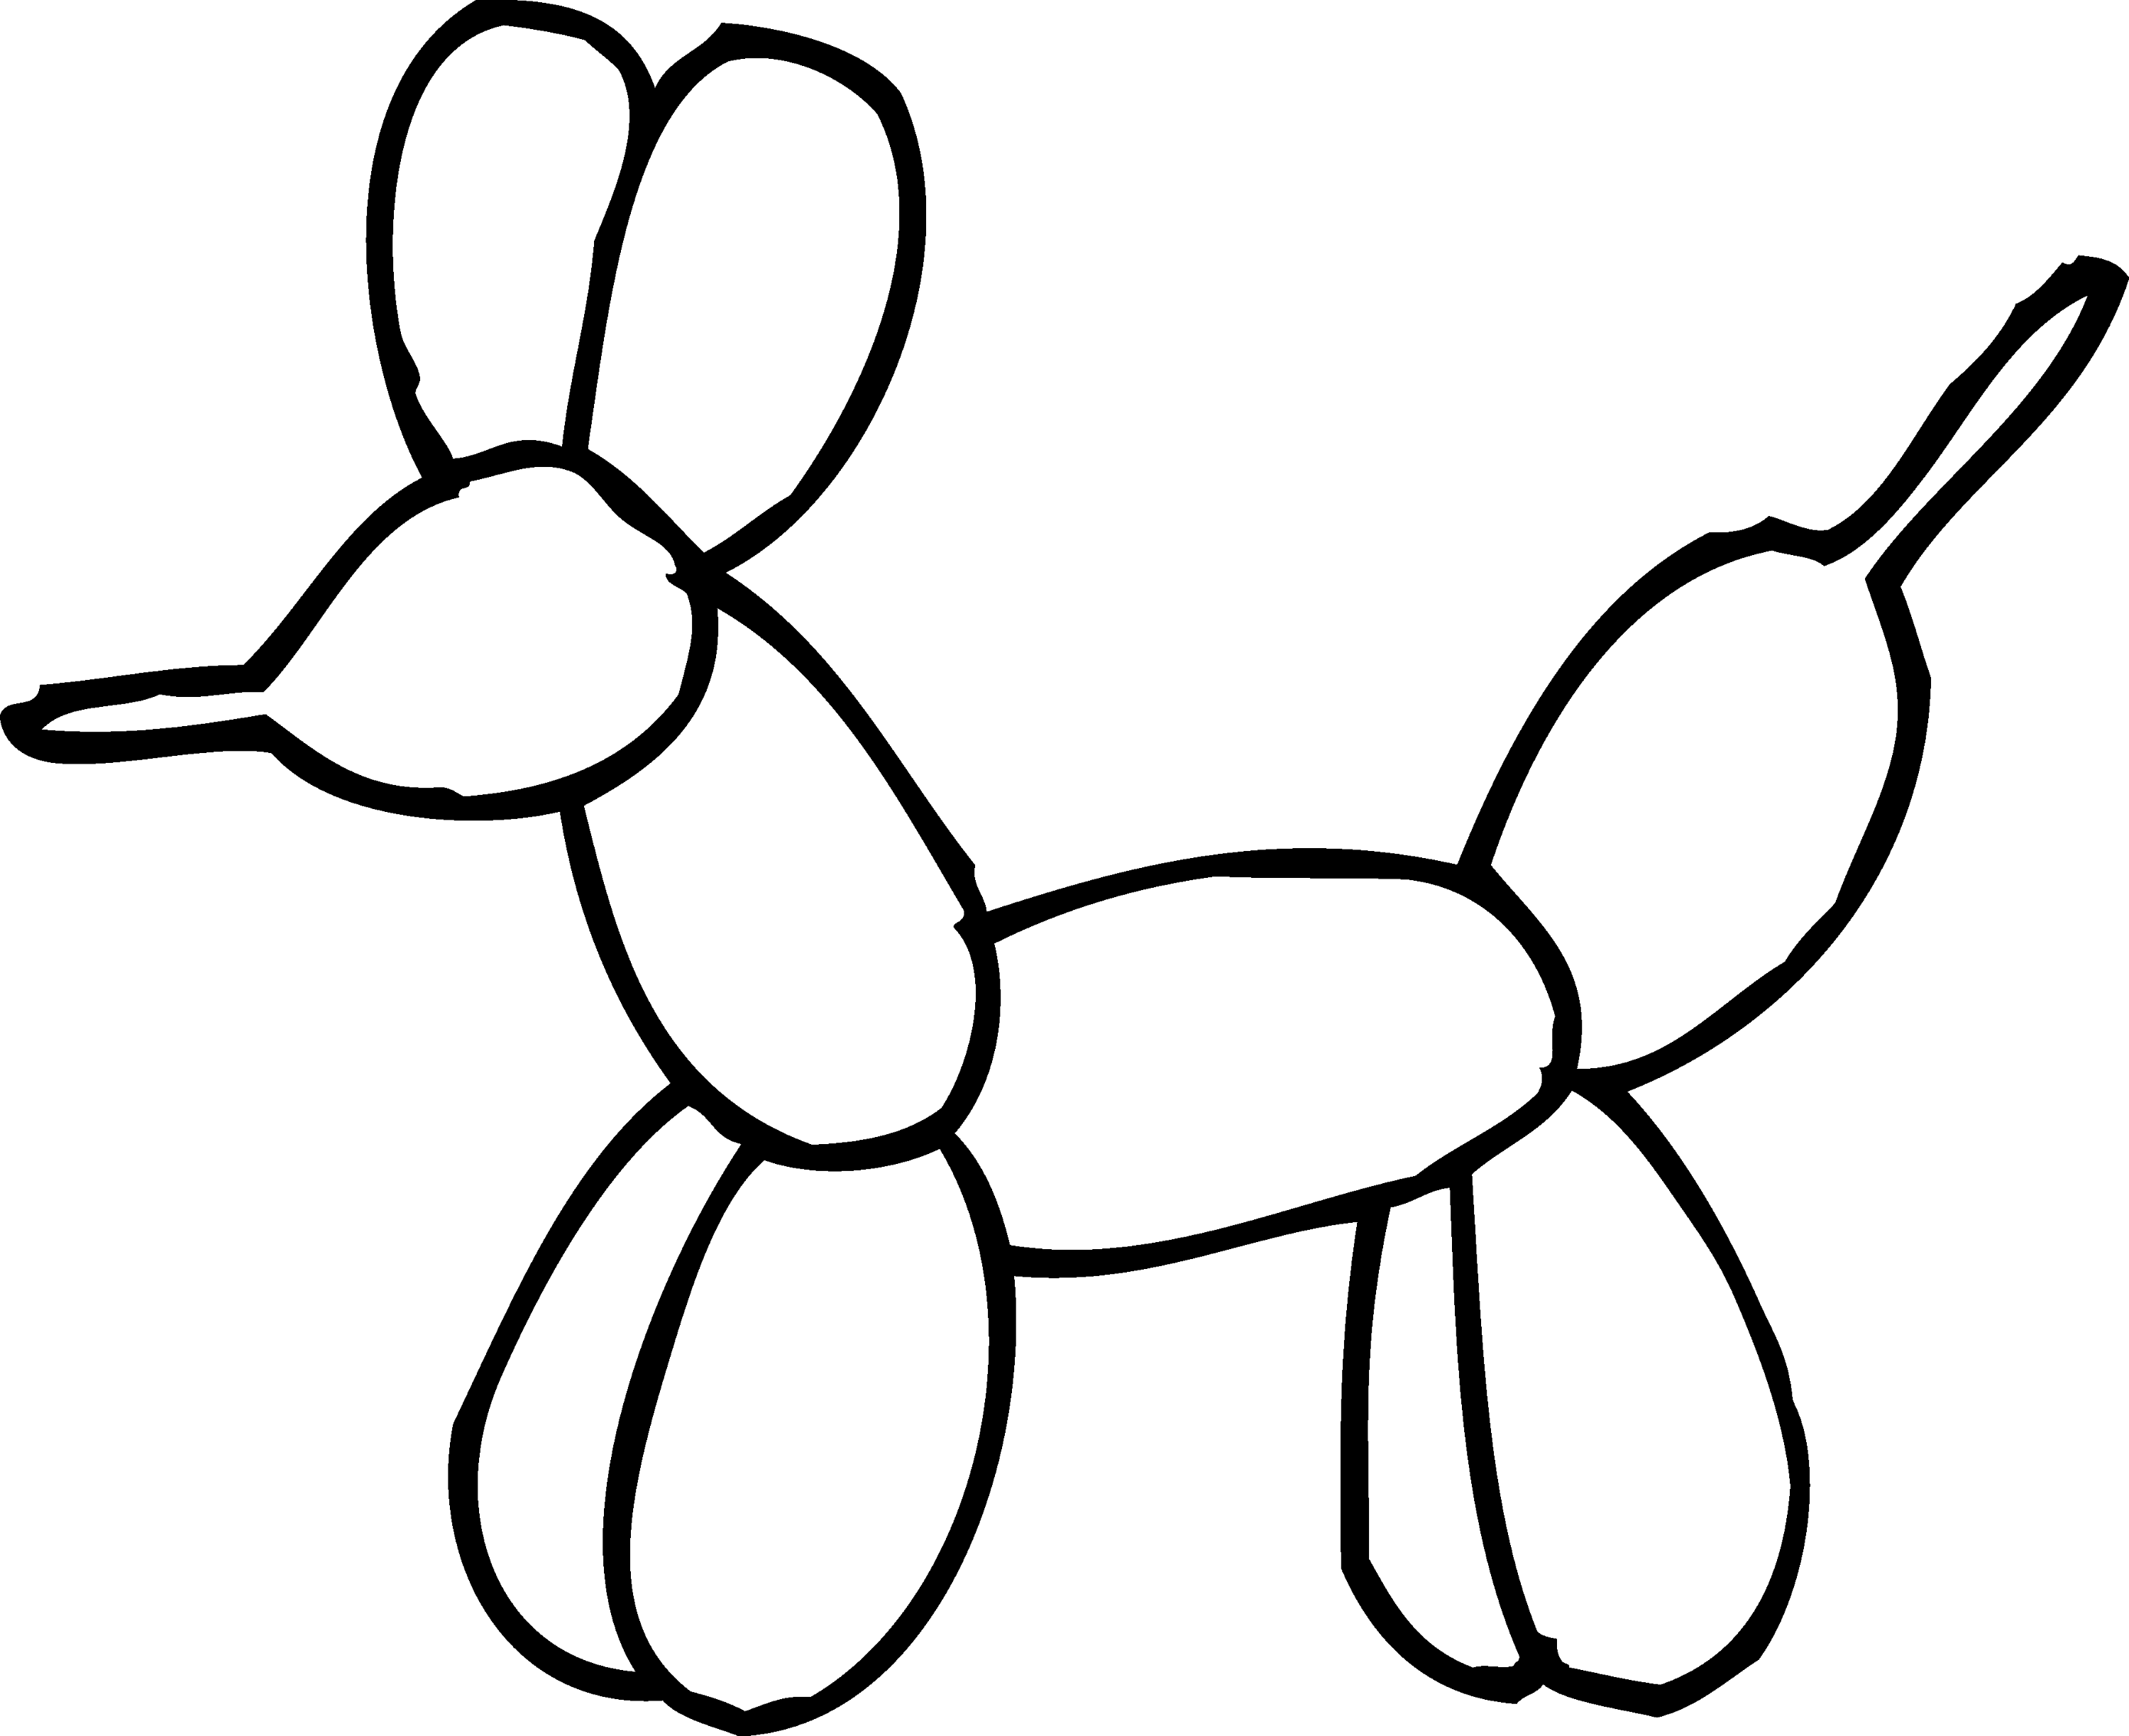 Download Balloon Animal Coloring Page - Free Clip Art